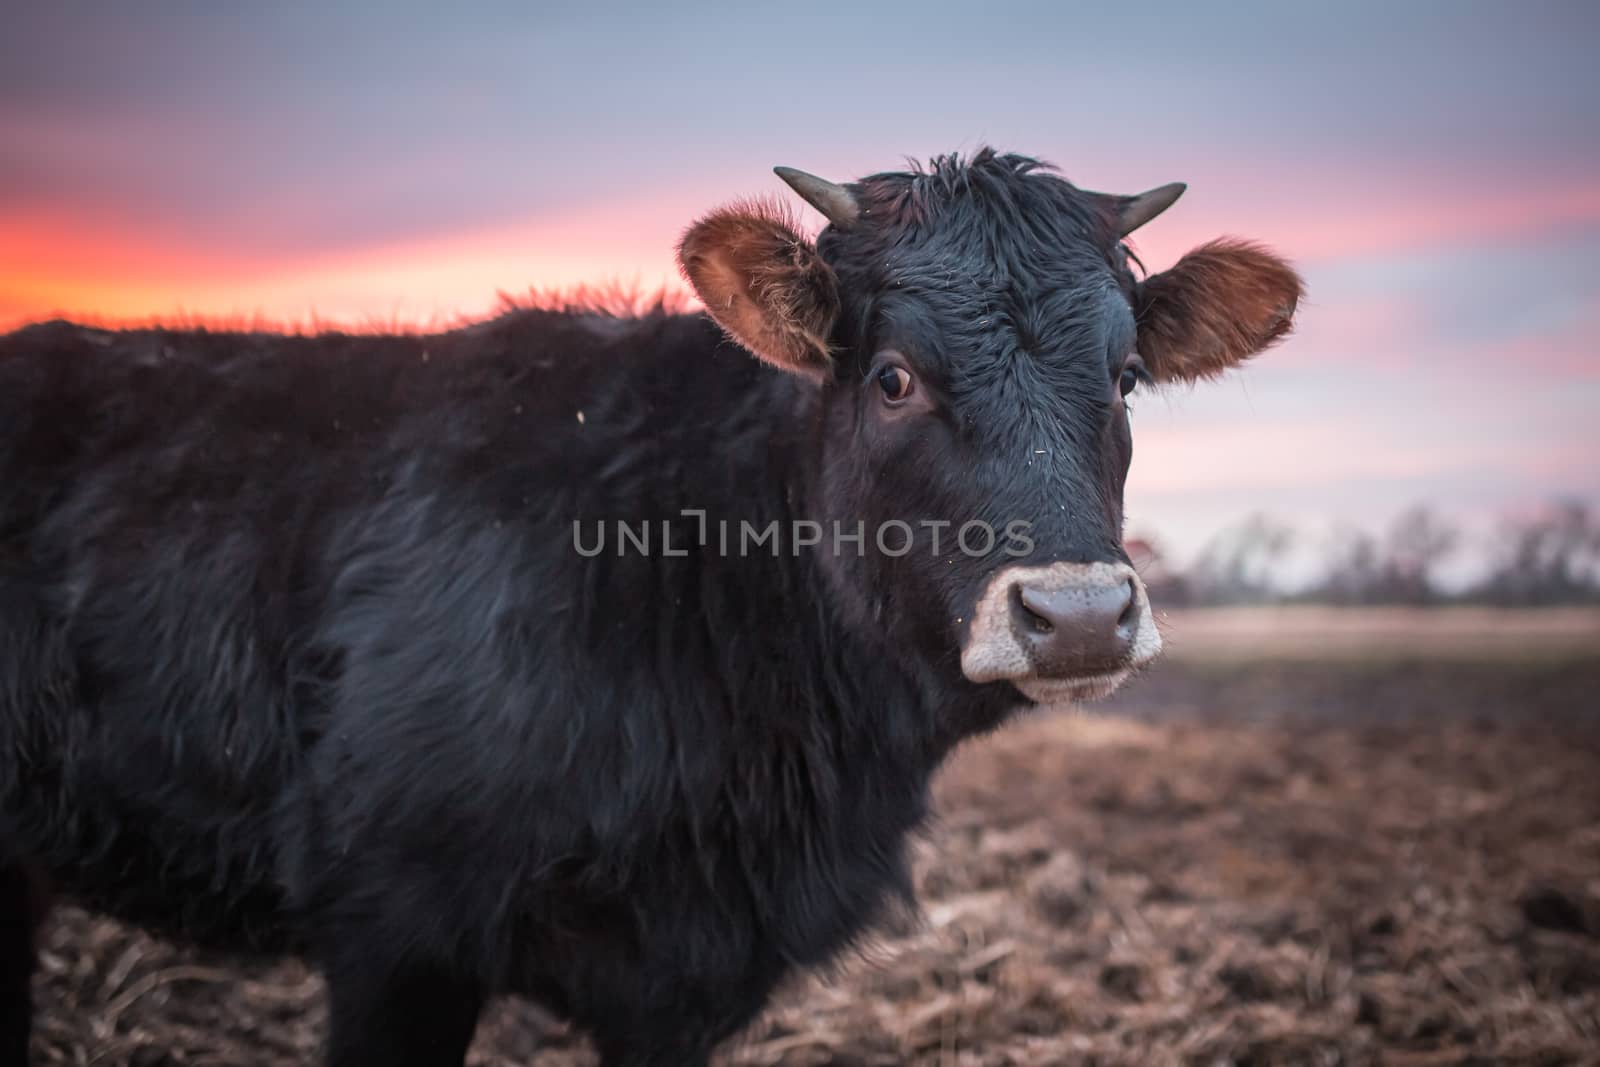 Happy single cow on a meadow during sunset in summer